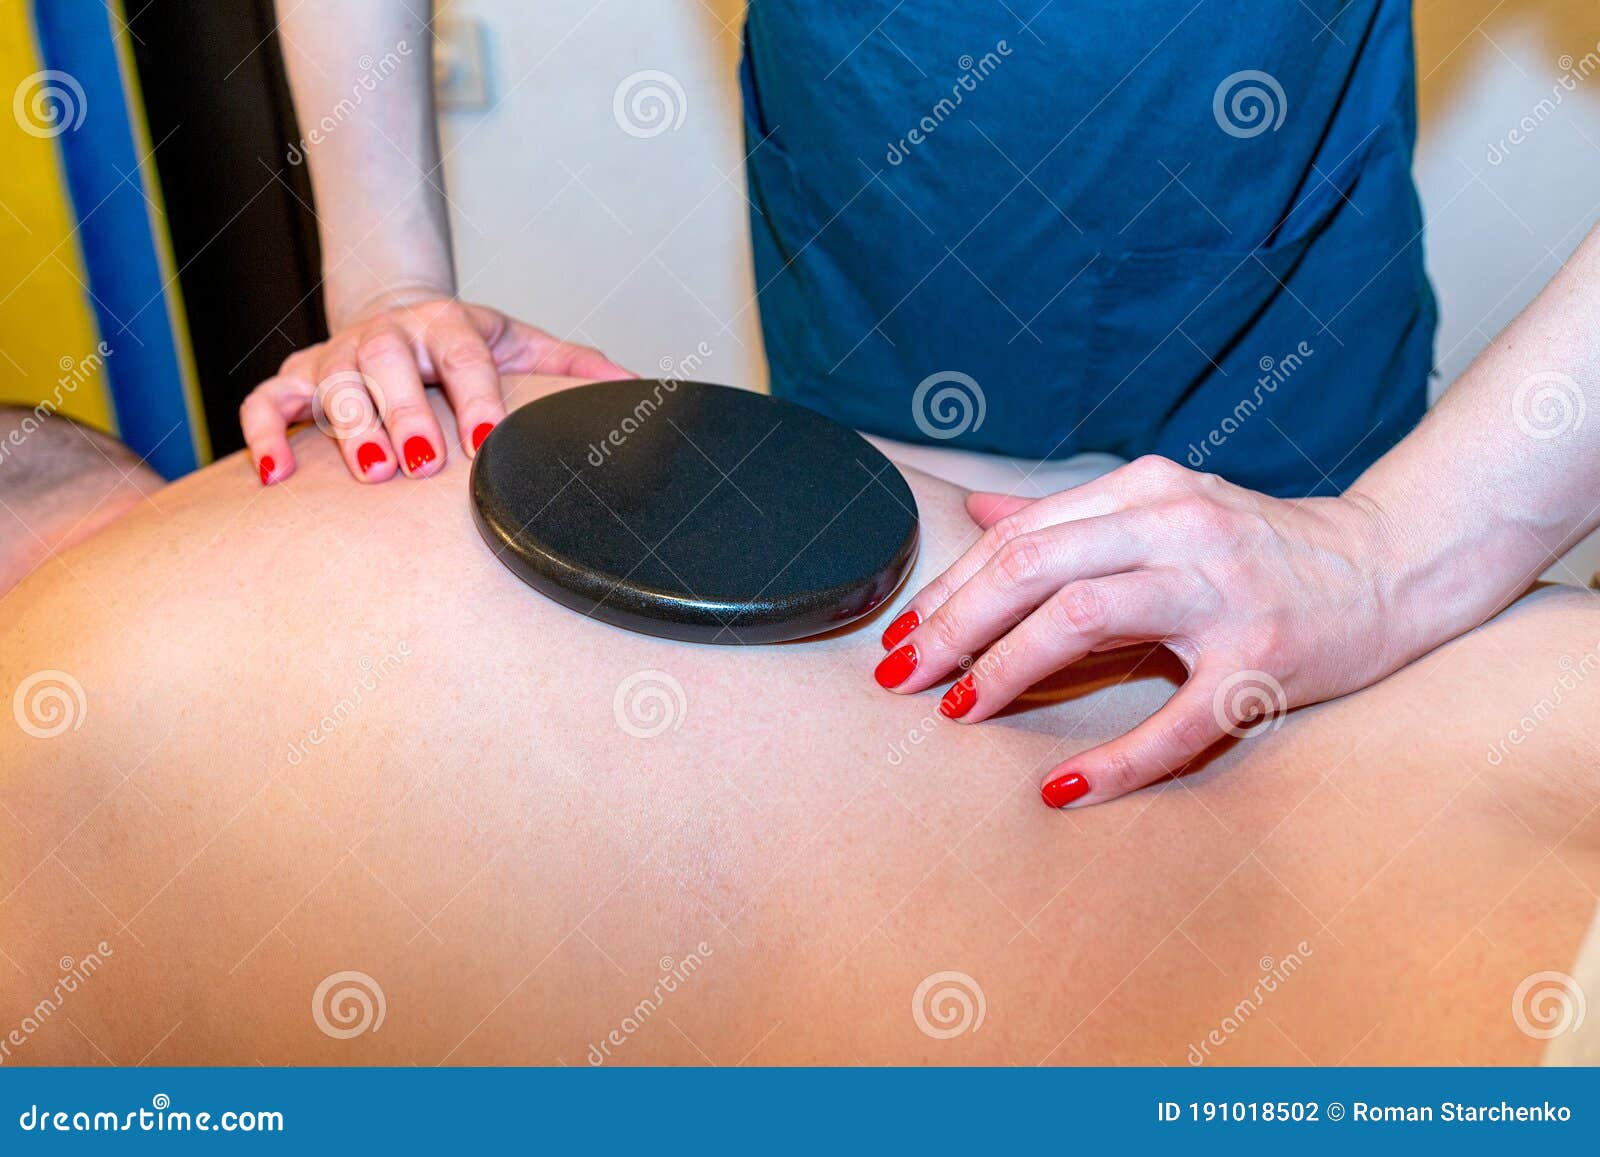 Japanese Back Massage With Warm Black Stones In The Massage Parlo